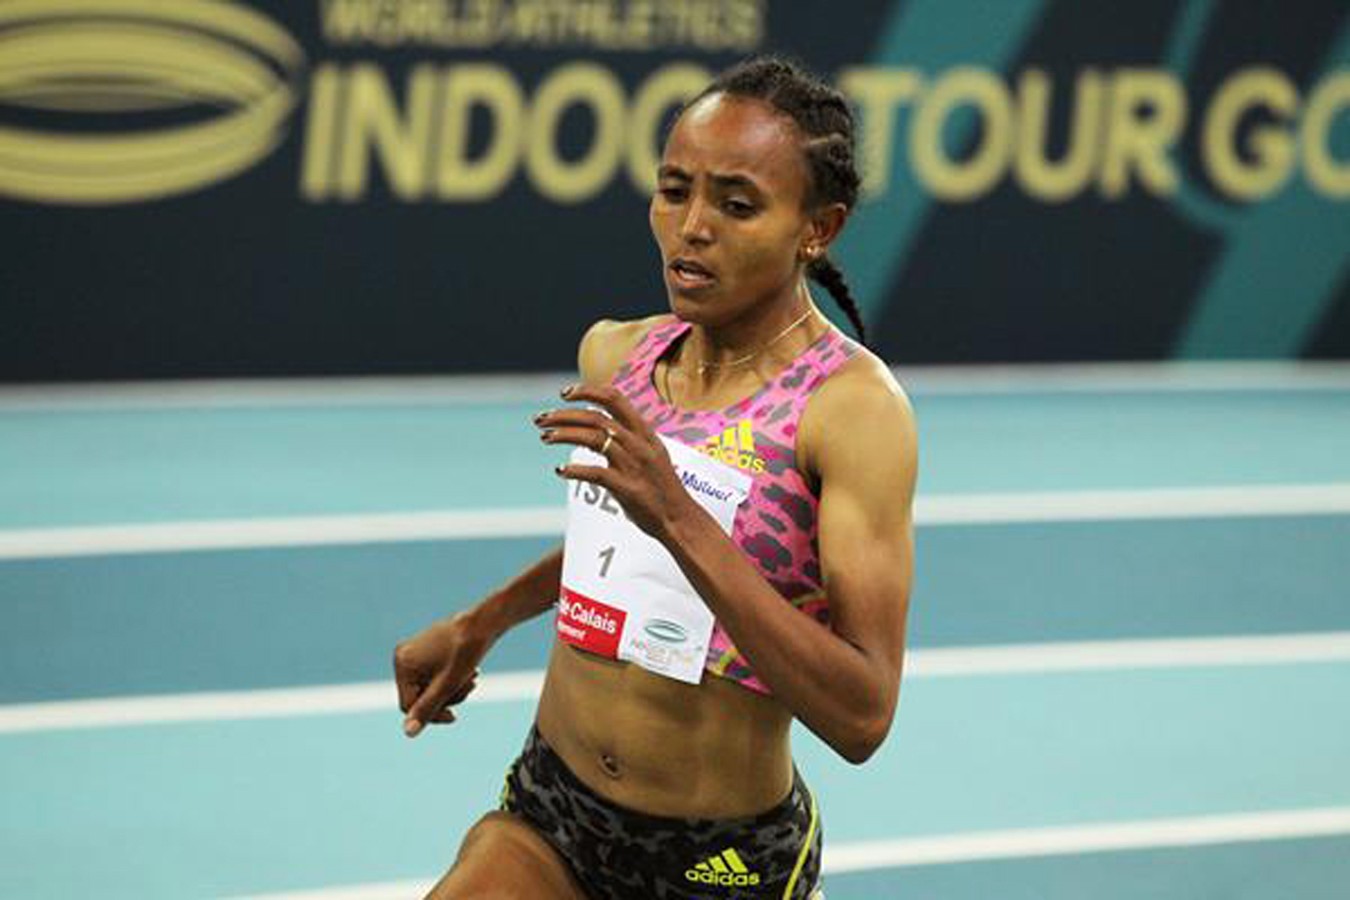 Gudaf Tsegay on her way to winning the 1500m at the World Athletics Indoor Tour Gold meeting in Lievin (© Jean-Pierre Durand)